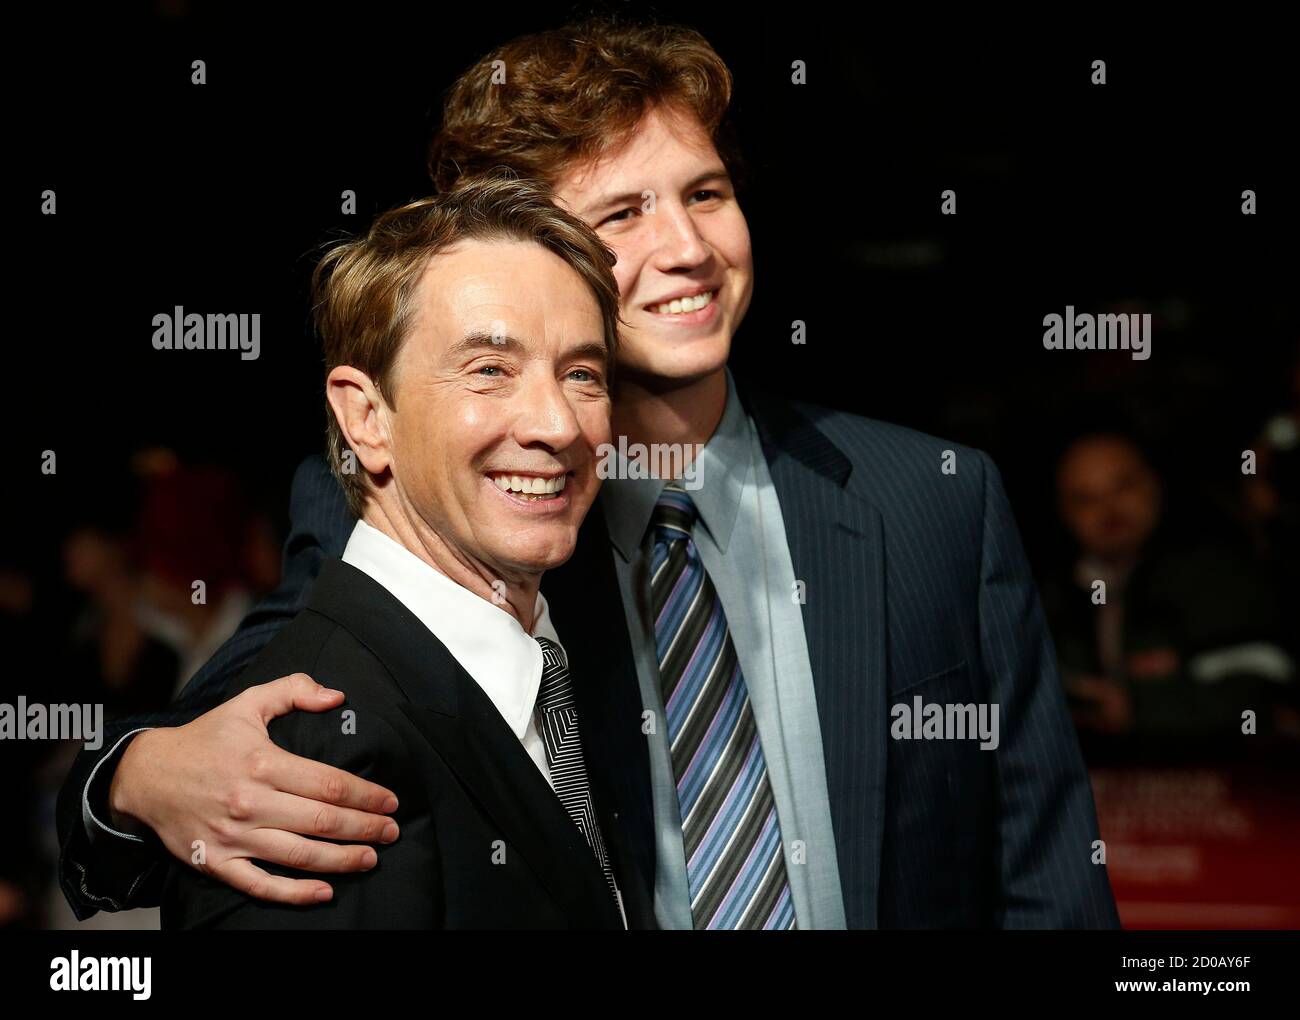 Martin Short And Son Henry Short High Resolution Stock Photography and  Images - Alamy